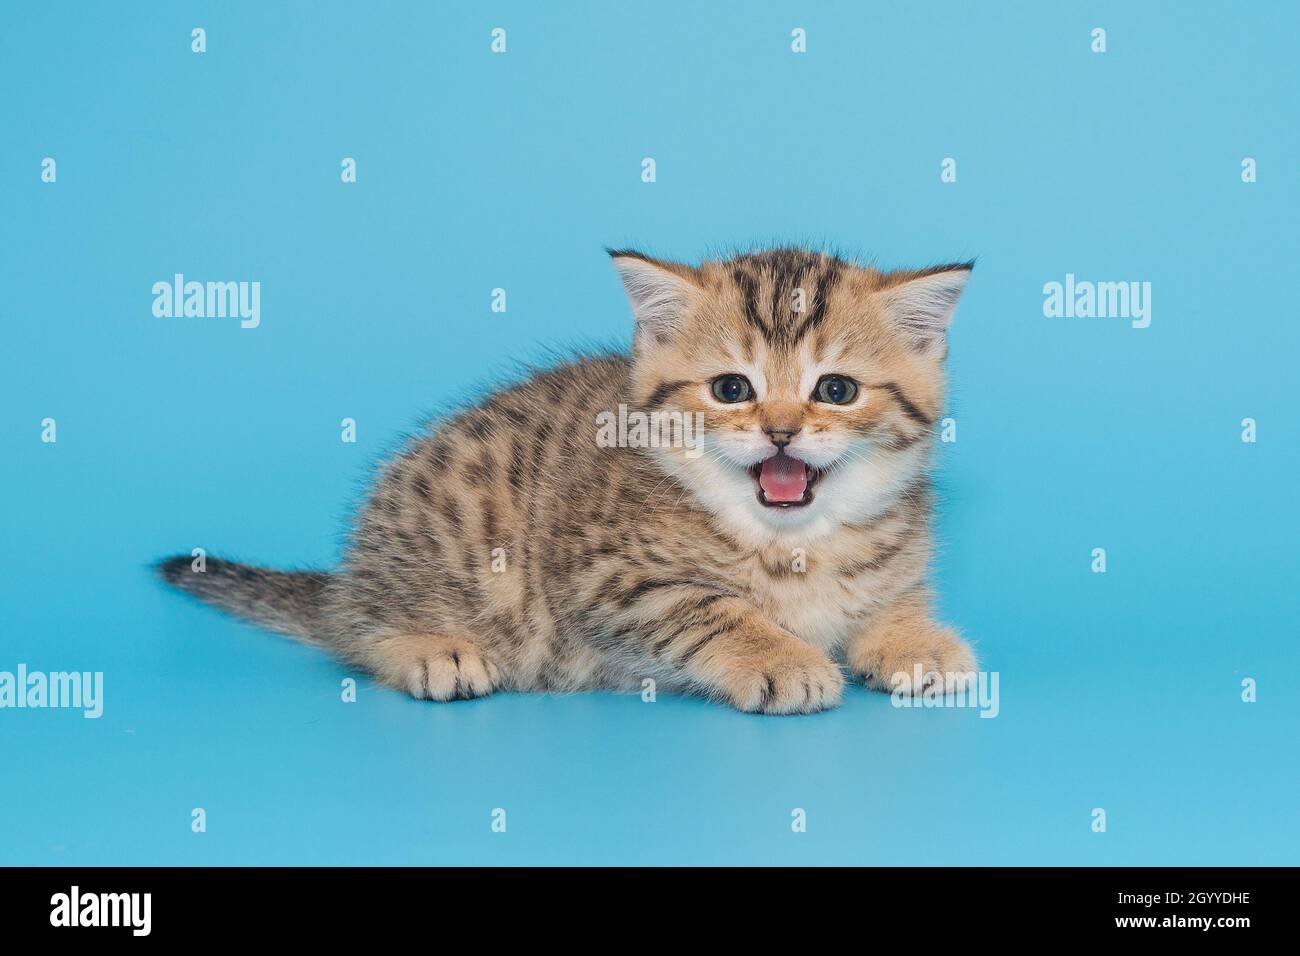 Funny Scottish kitten meows loudly on a blue background Stock Photo